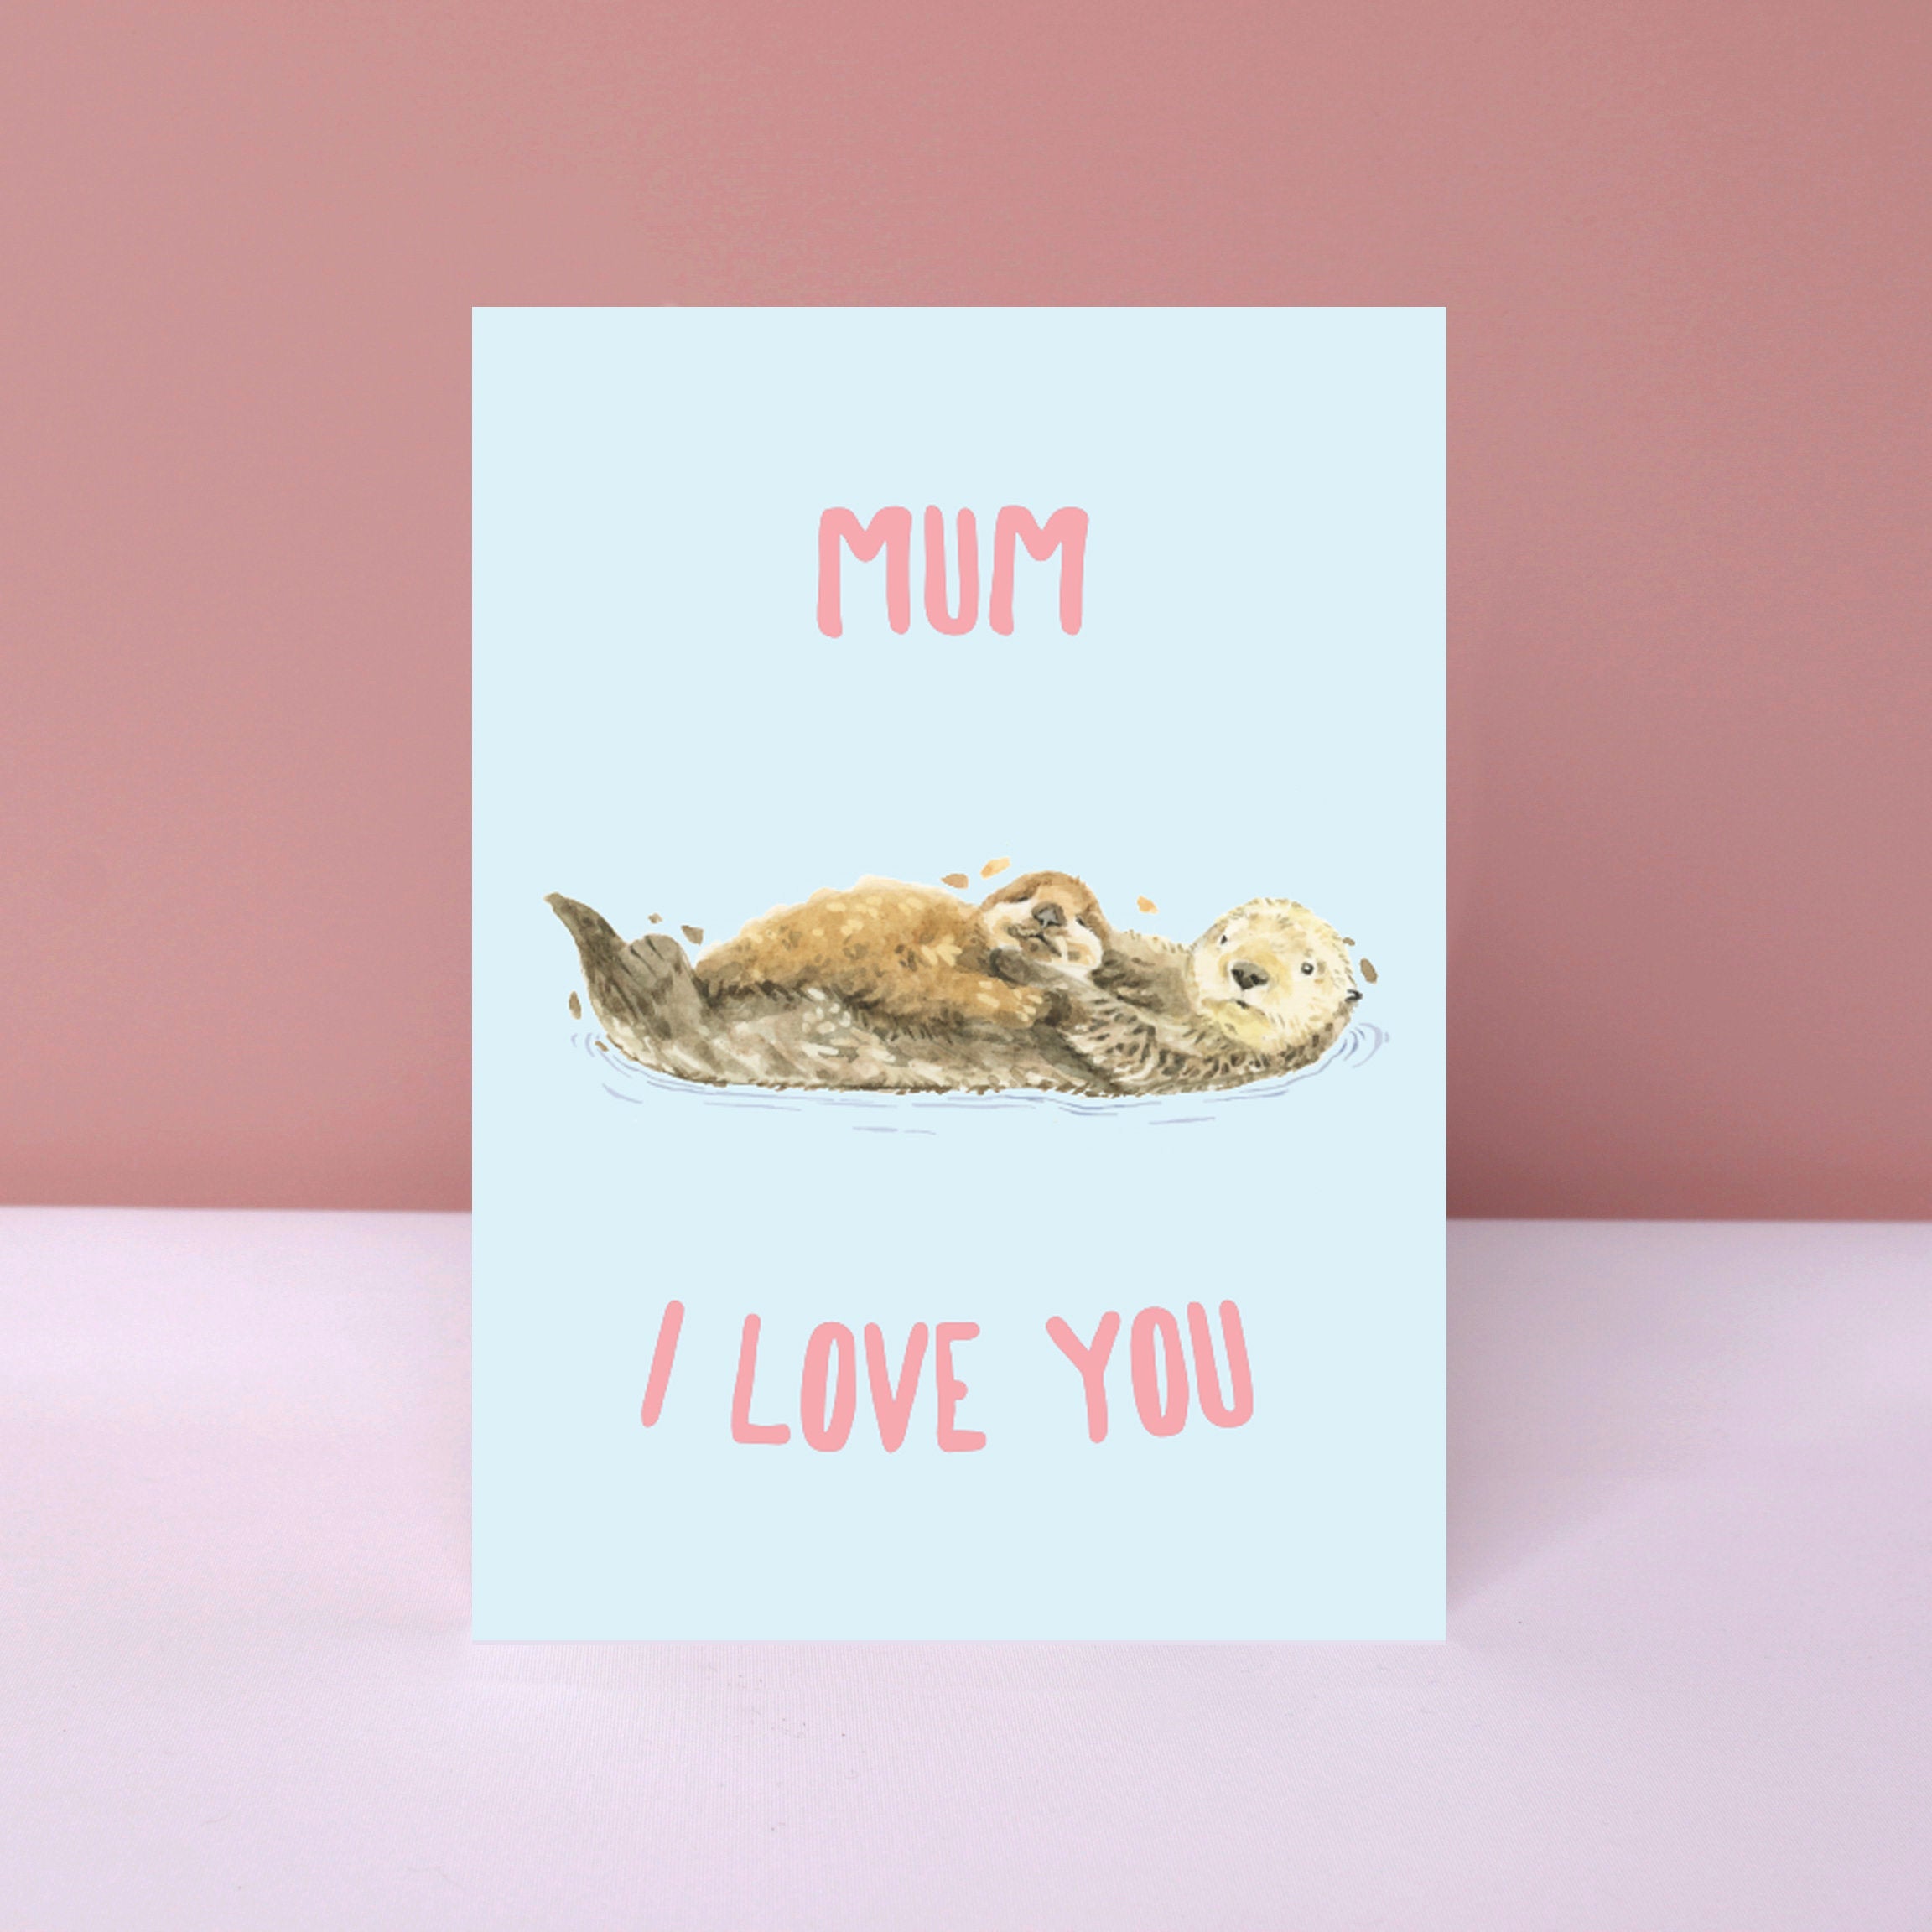 Mum I Love You, Otter Card for Mothers Day, Mum's Birthday